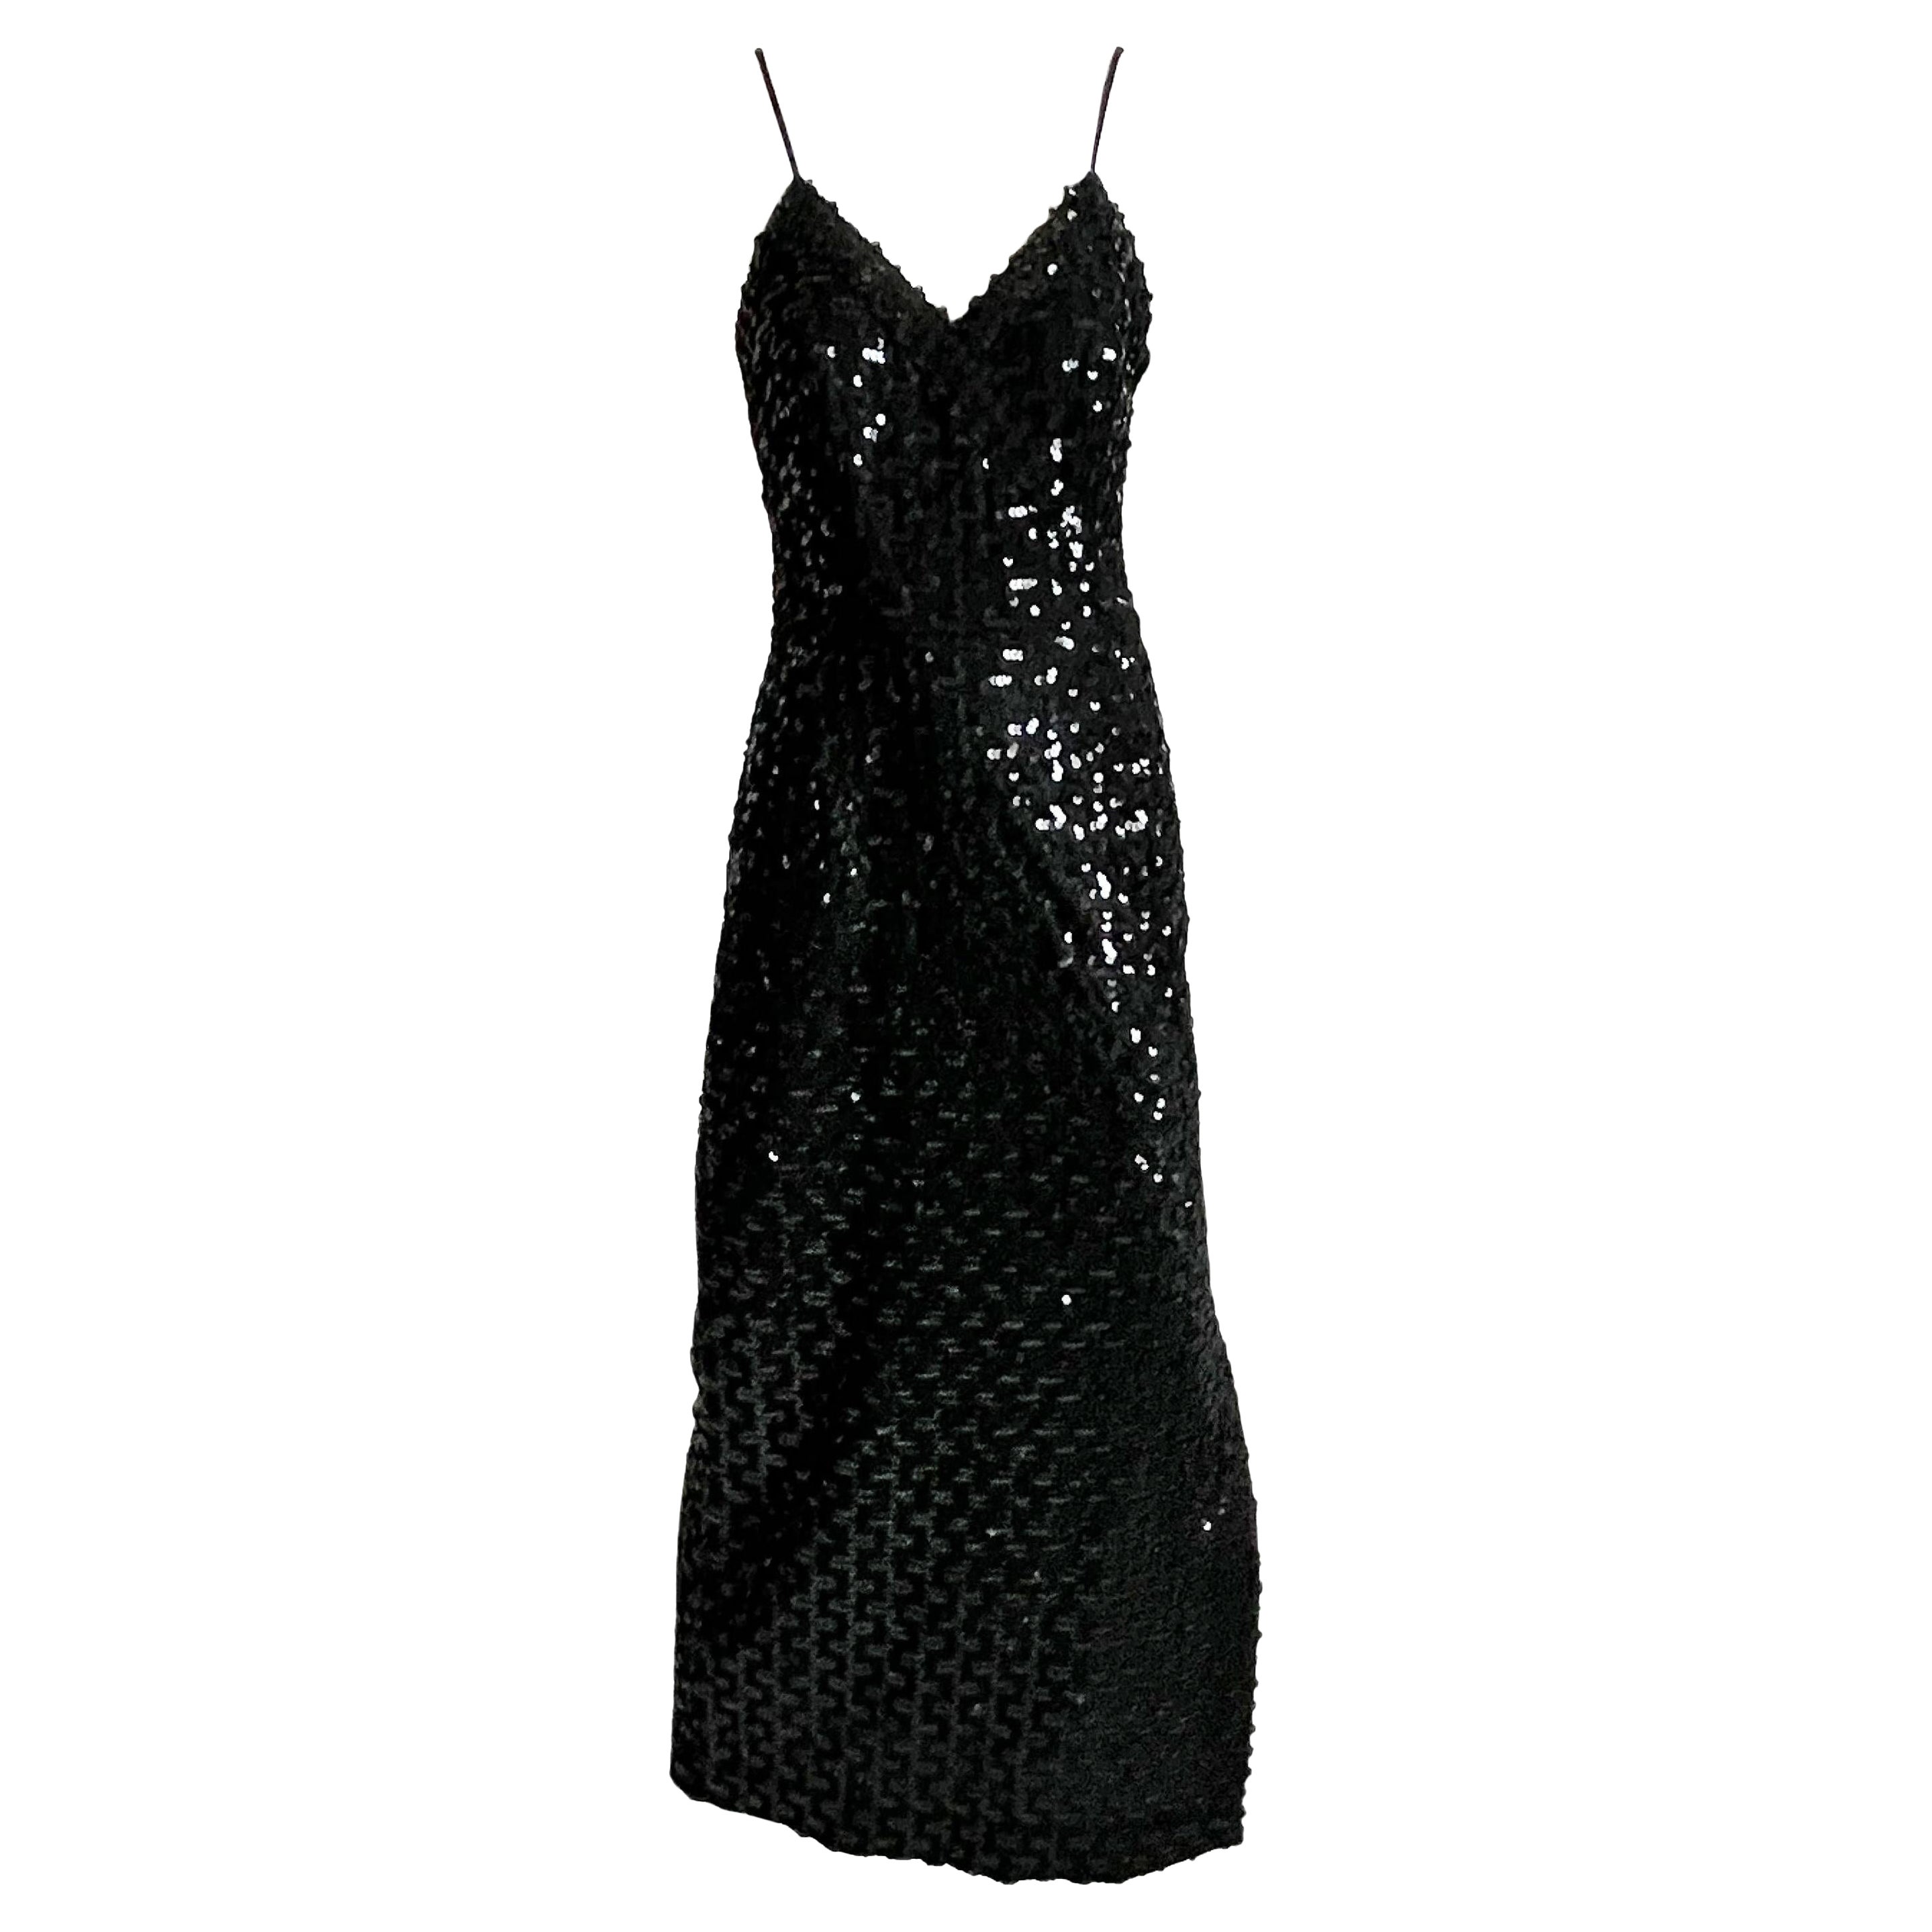 Lilli Diamond Evening Gown Sequins Sexy Black Knit Formal Dress Vintage 70s For Sale